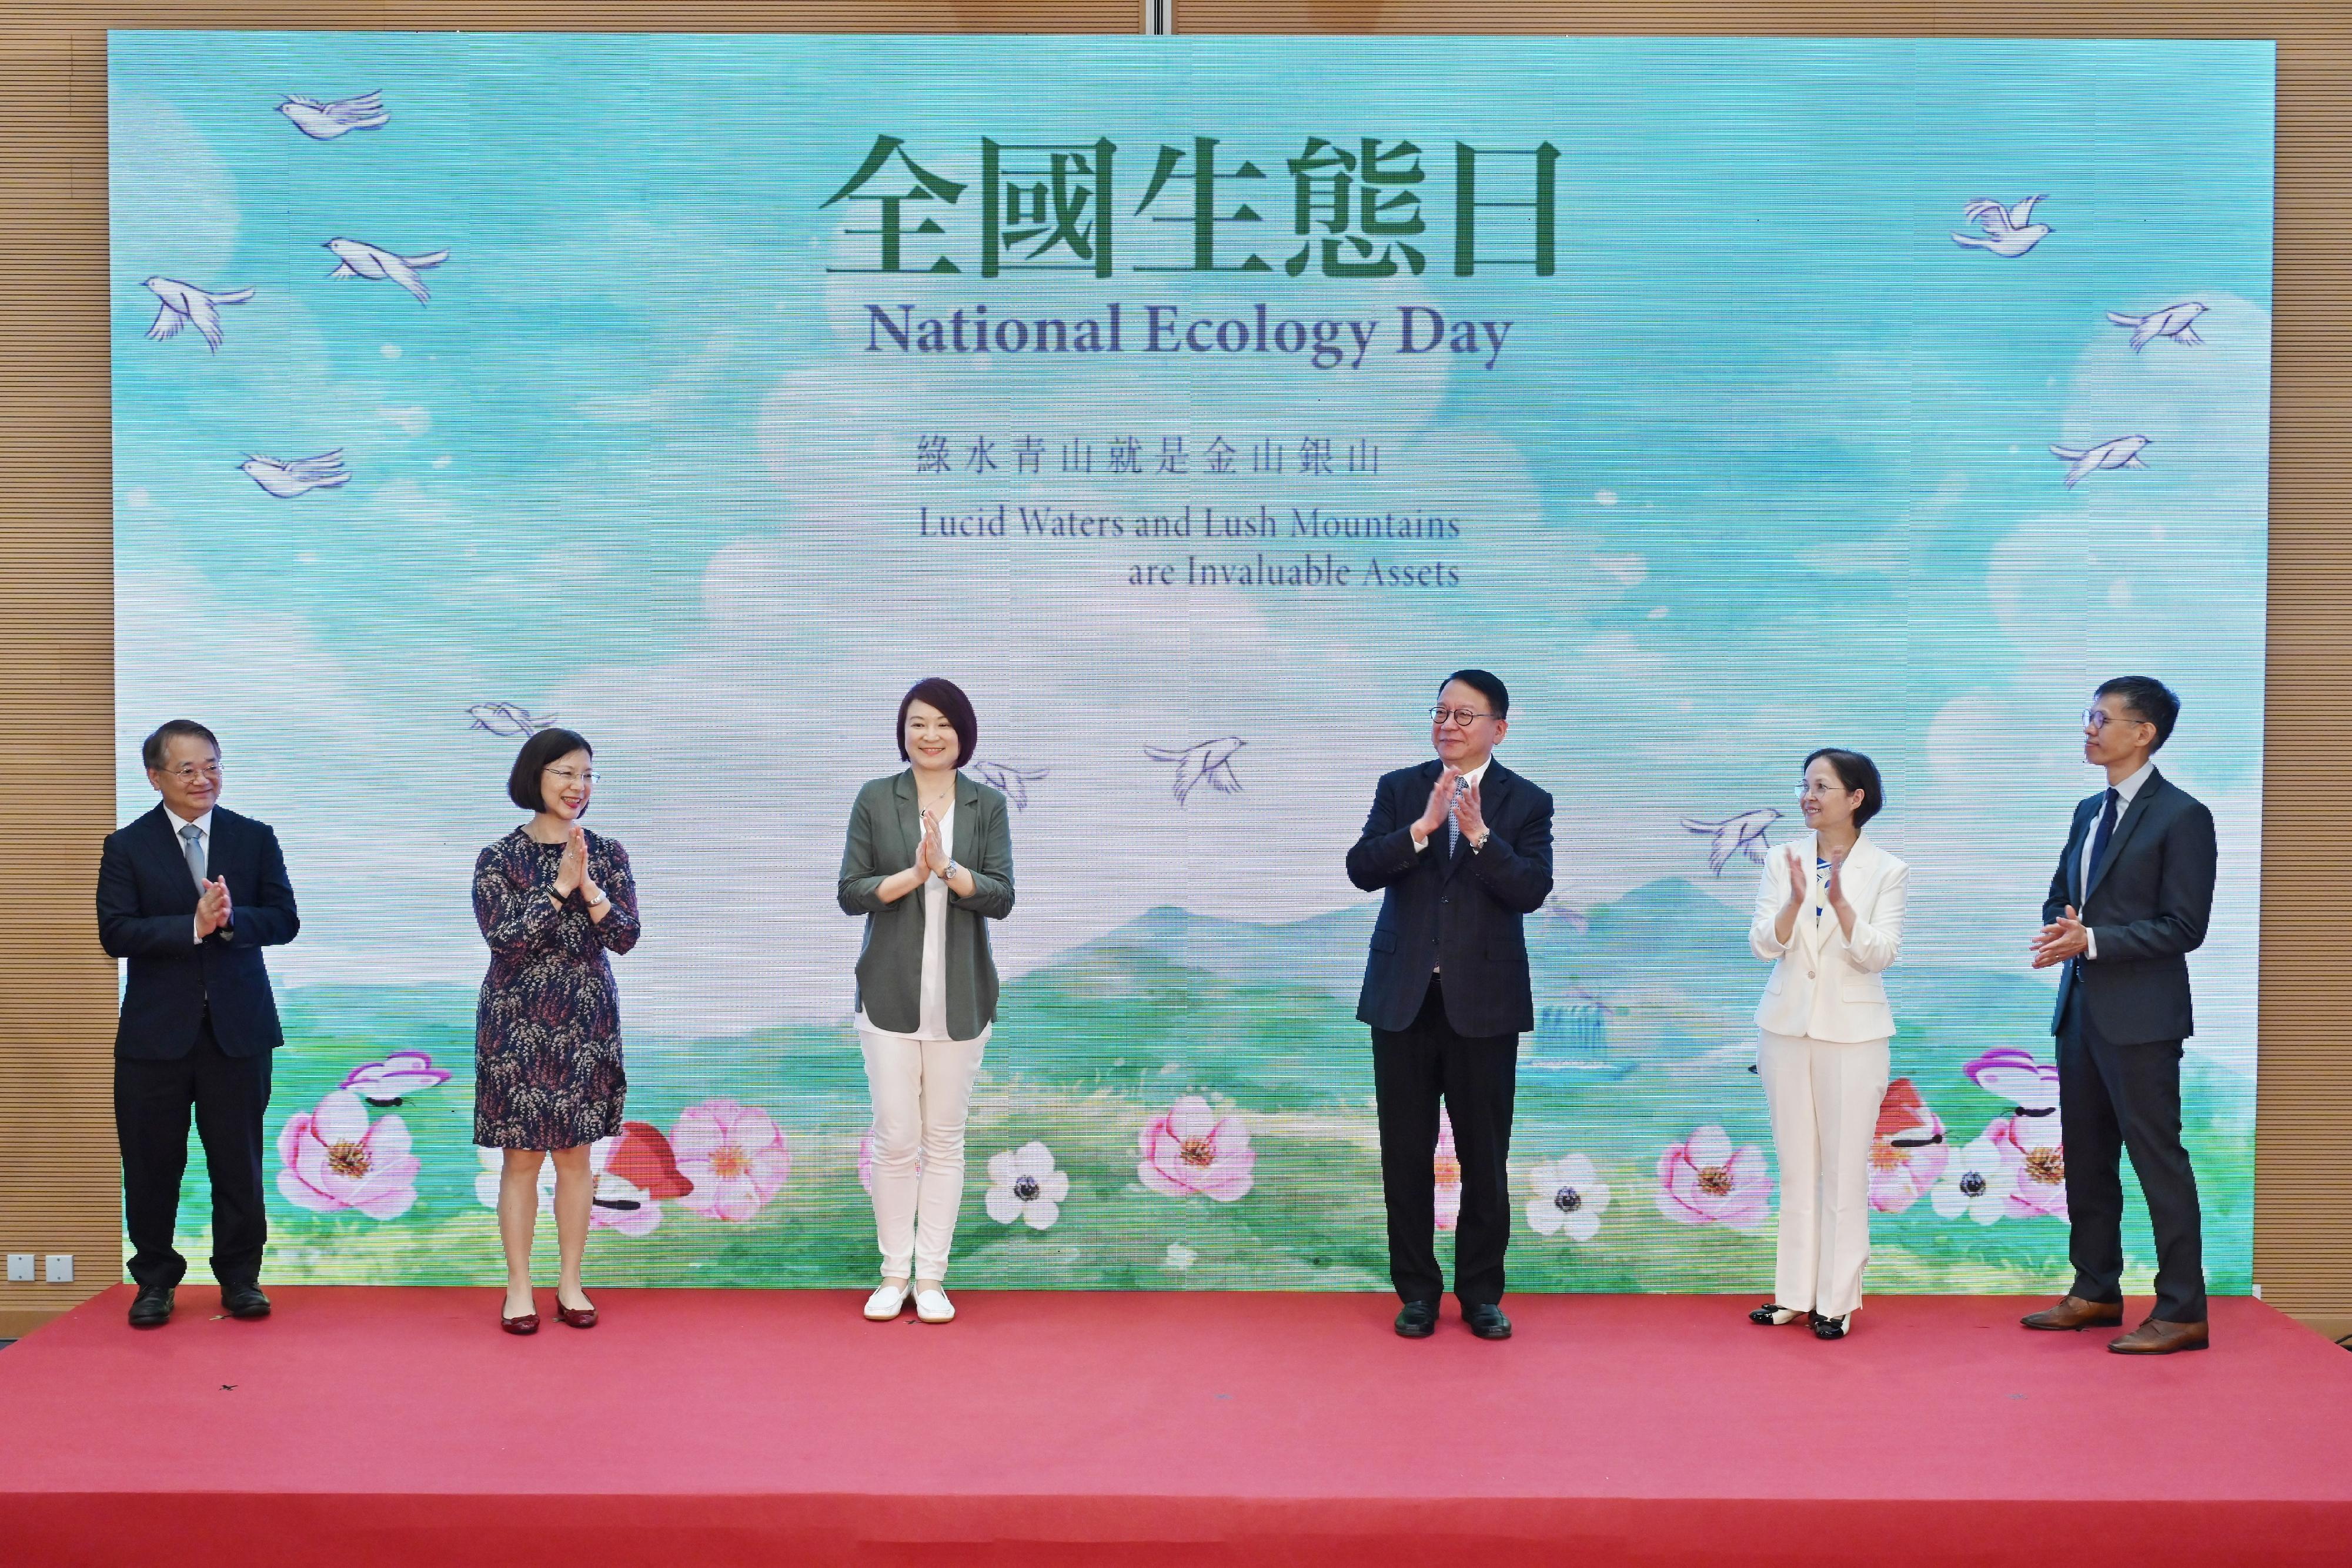 The Chief Secretary for Administration, Mr Chan Kwok-ki, attended the National Ecology Day Launching Ceremony today (August 15). Photo shows (from left) the Director of Environmental Protection, Dr Samuel Chui; the Permanent Secretary for Environment and Ecology (Environment), Miss Janice Tse; member of the Standing Committee of the 14th National People's Congress and Member of the Legislative Council Ms Starry Lee; Mr Chan; the Acting Secretary for Environment and Ecology, Miss Diane Wong; and the Acting Director of Agriculture, Fisheries and Conservation, Mr Mickey Lai, officiating at the Launching Ceremony.